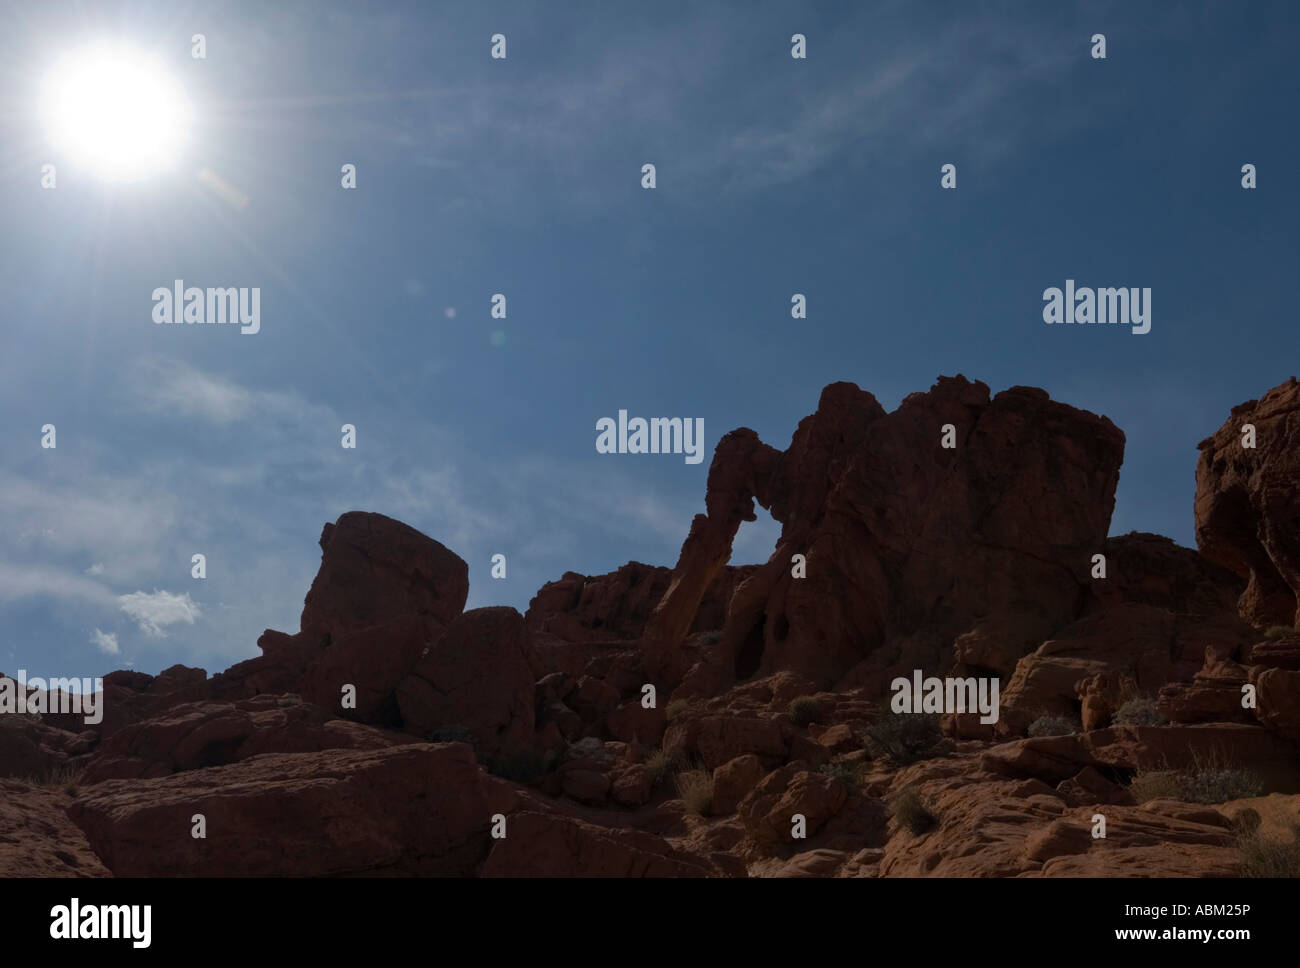 Valley Of Fire State Park. Elephant Rock. Stockfoto